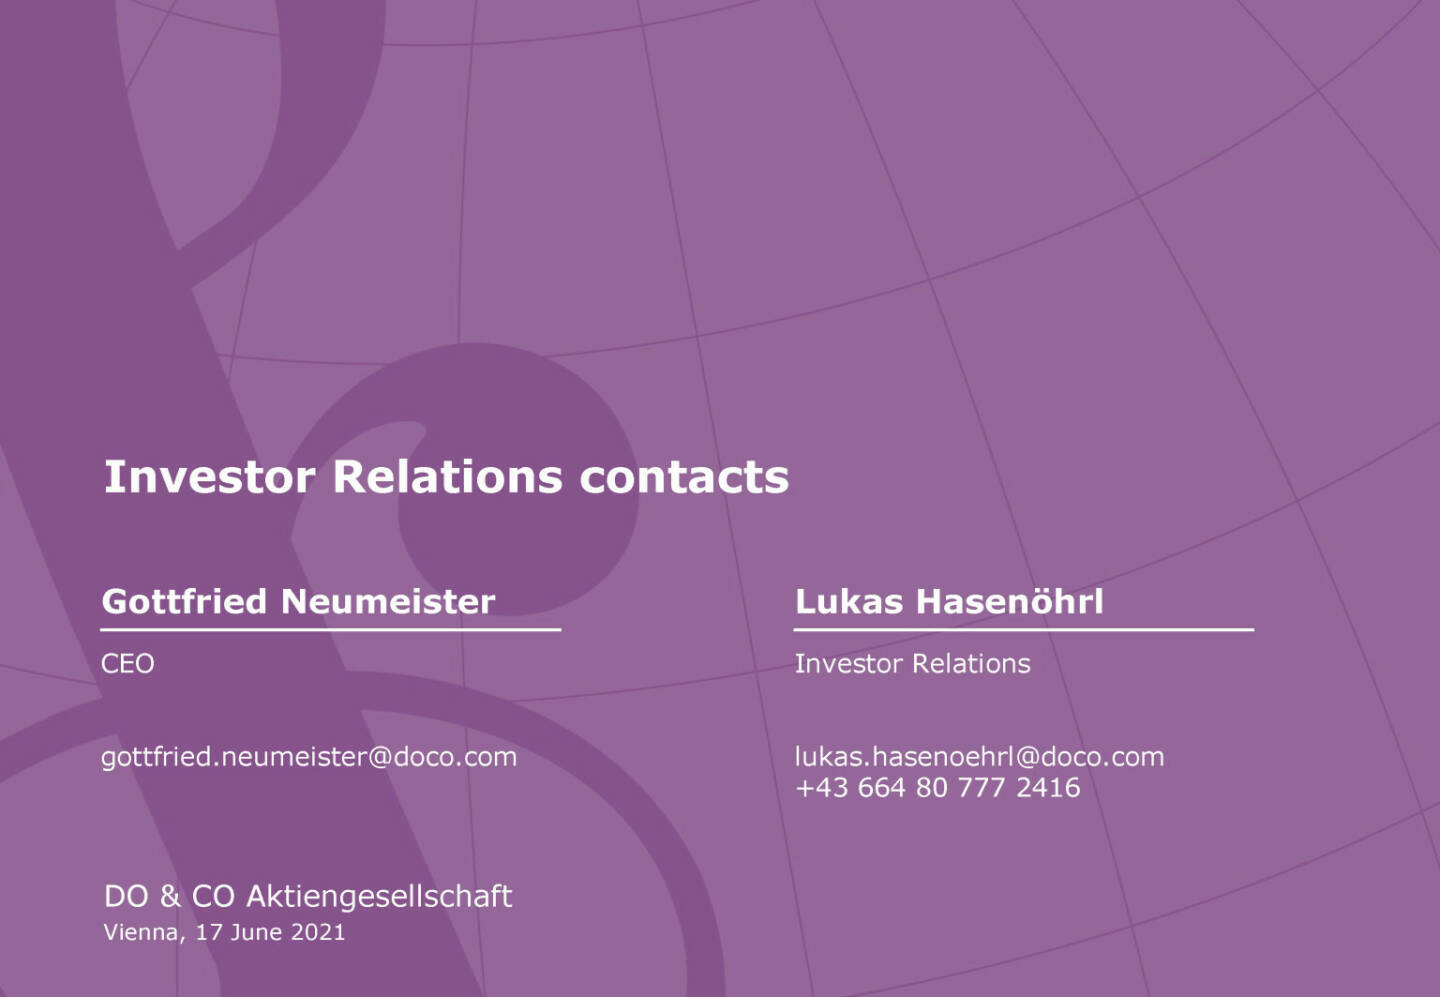 Do&Co - Investor Relations contacts